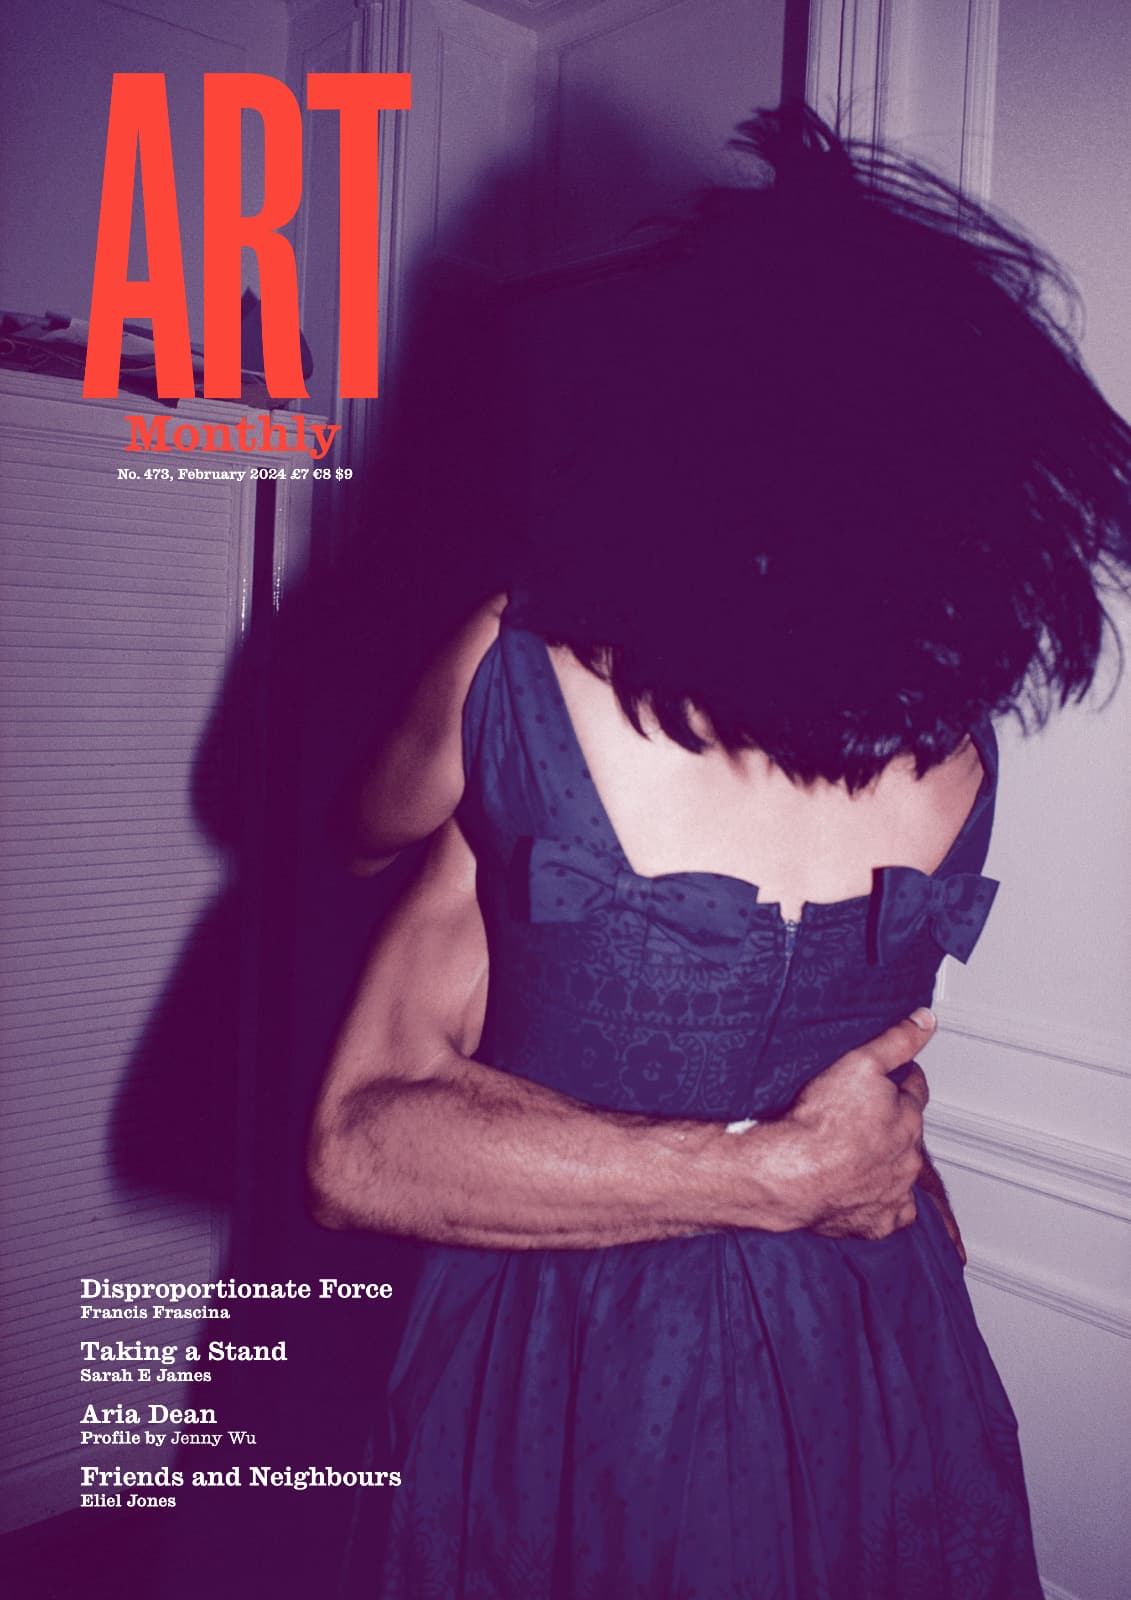 Art Monthly cover